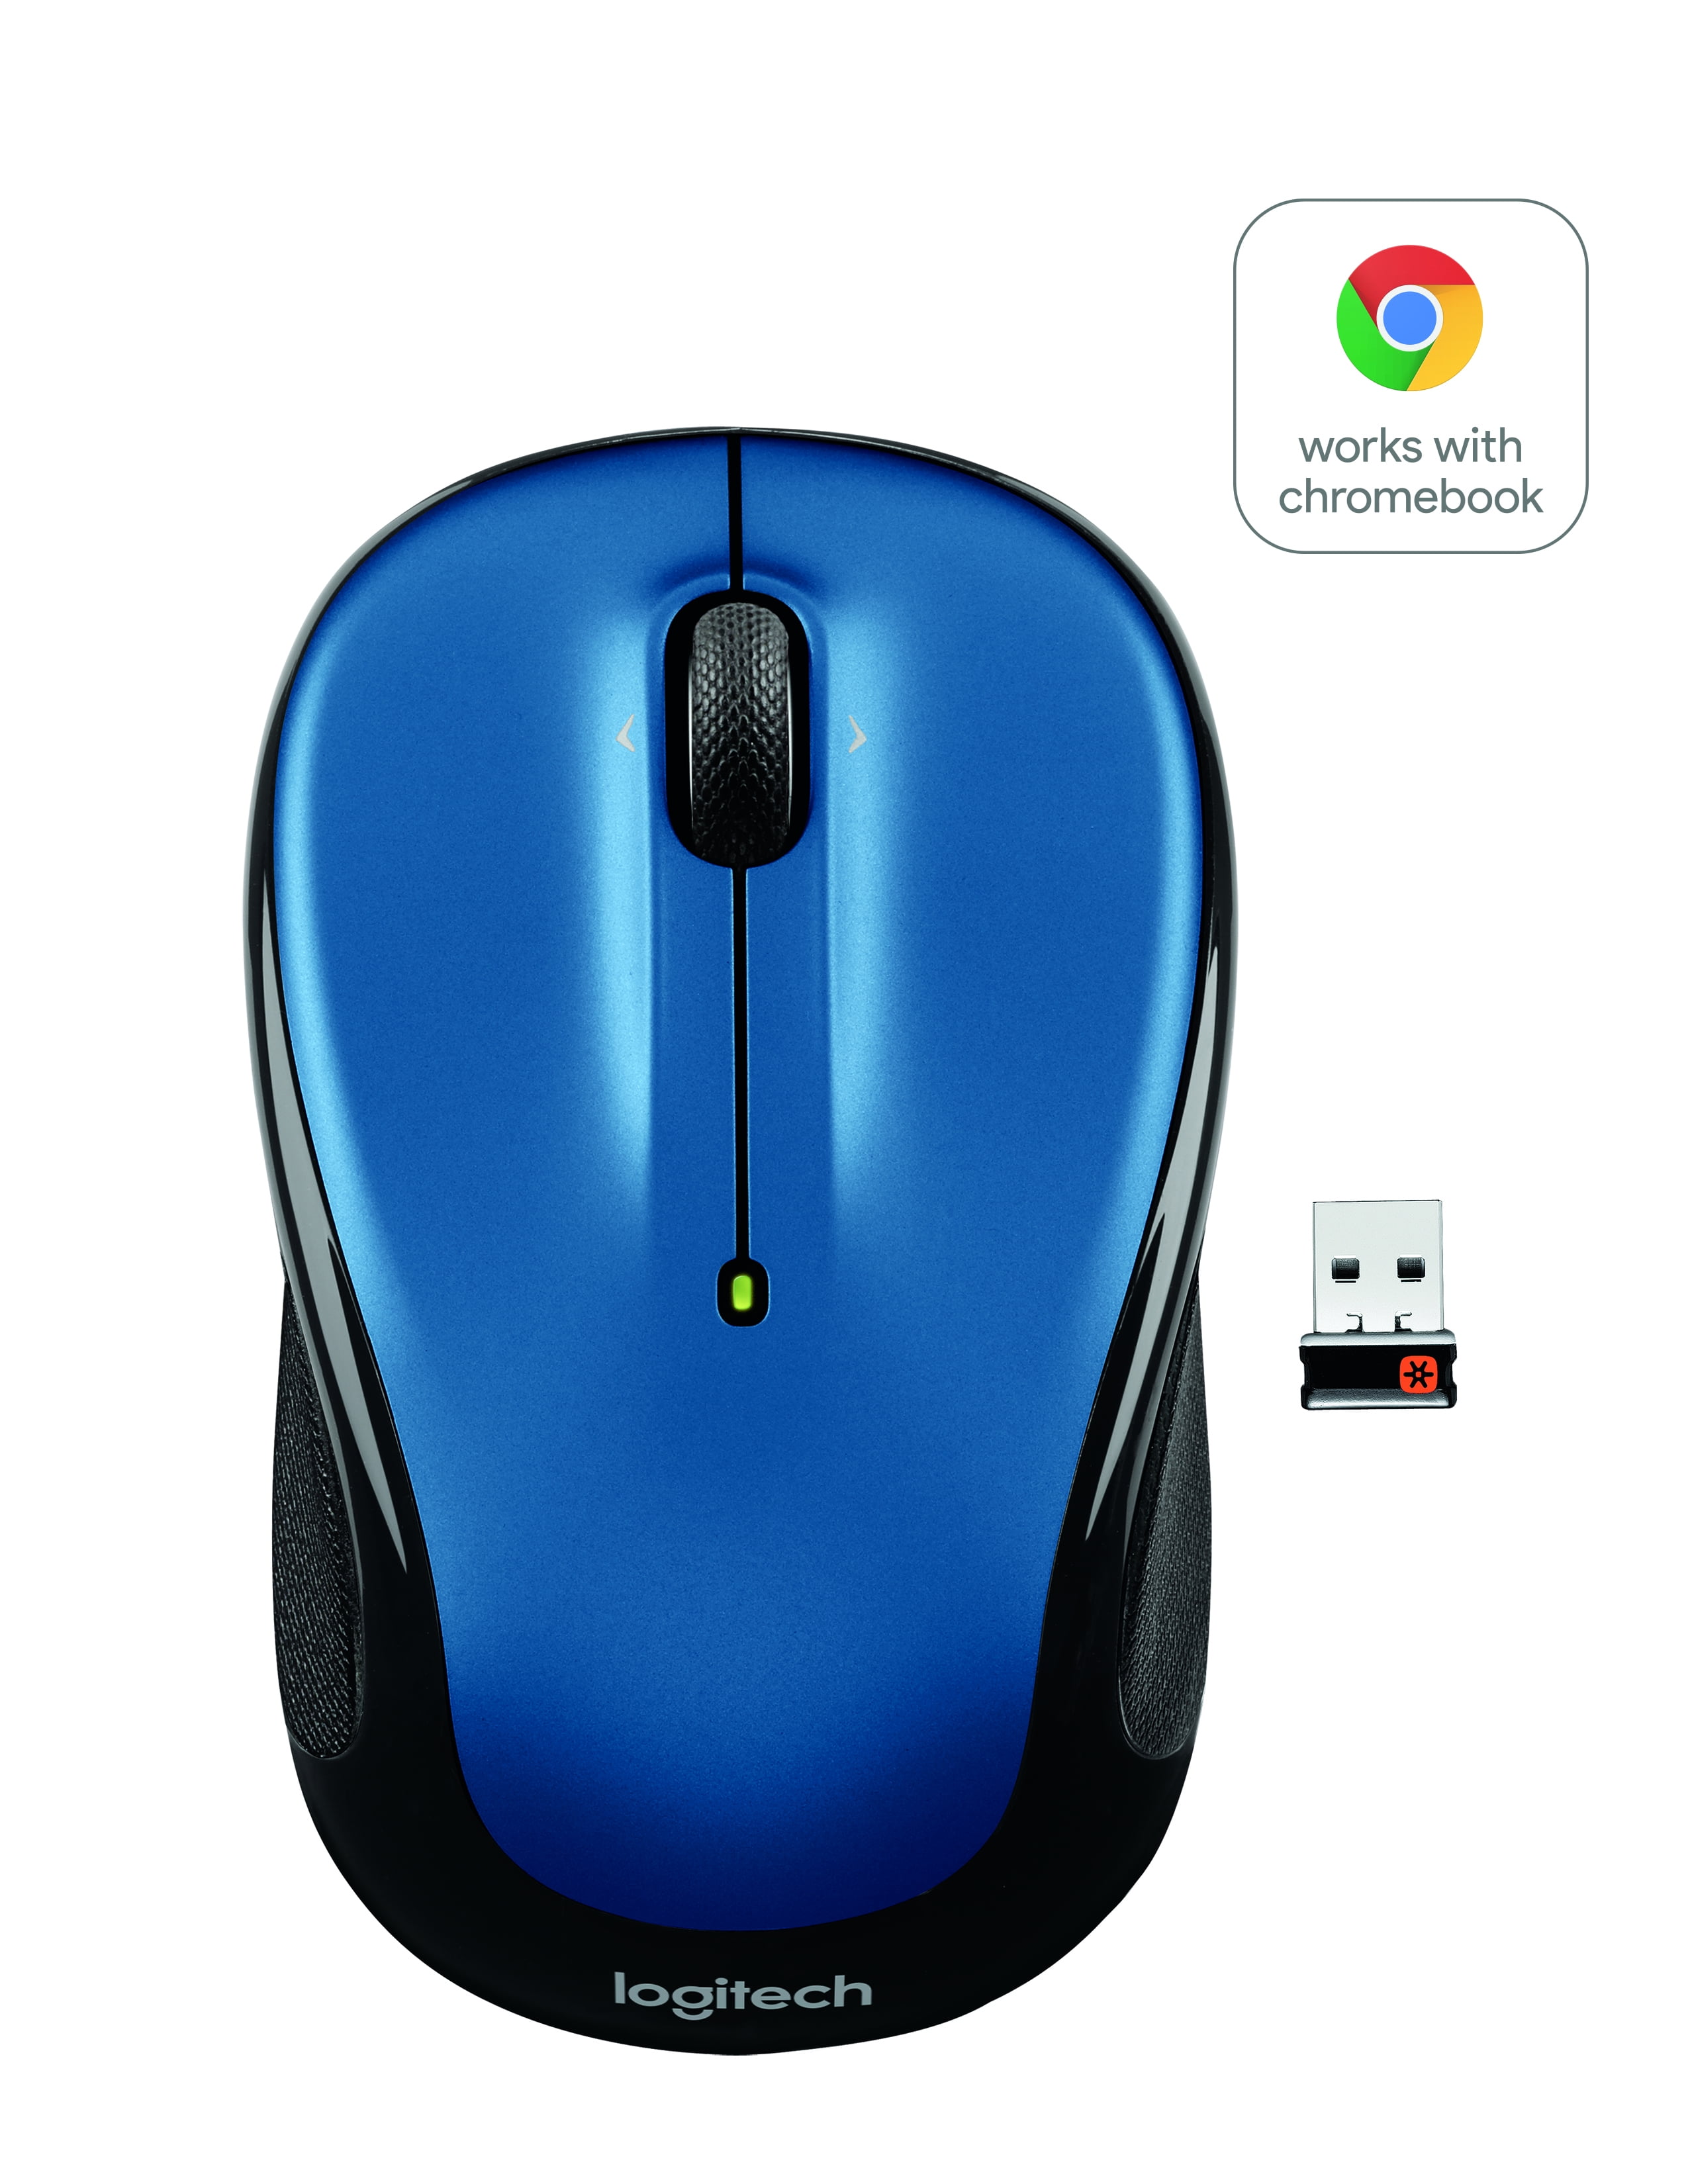 romanforfatter Monica voldsom Logitech Compact Wireless Mouse, 2.4 GHz with USB Unifying Receiver,  Optical Tracking, Blue - Walmart.com